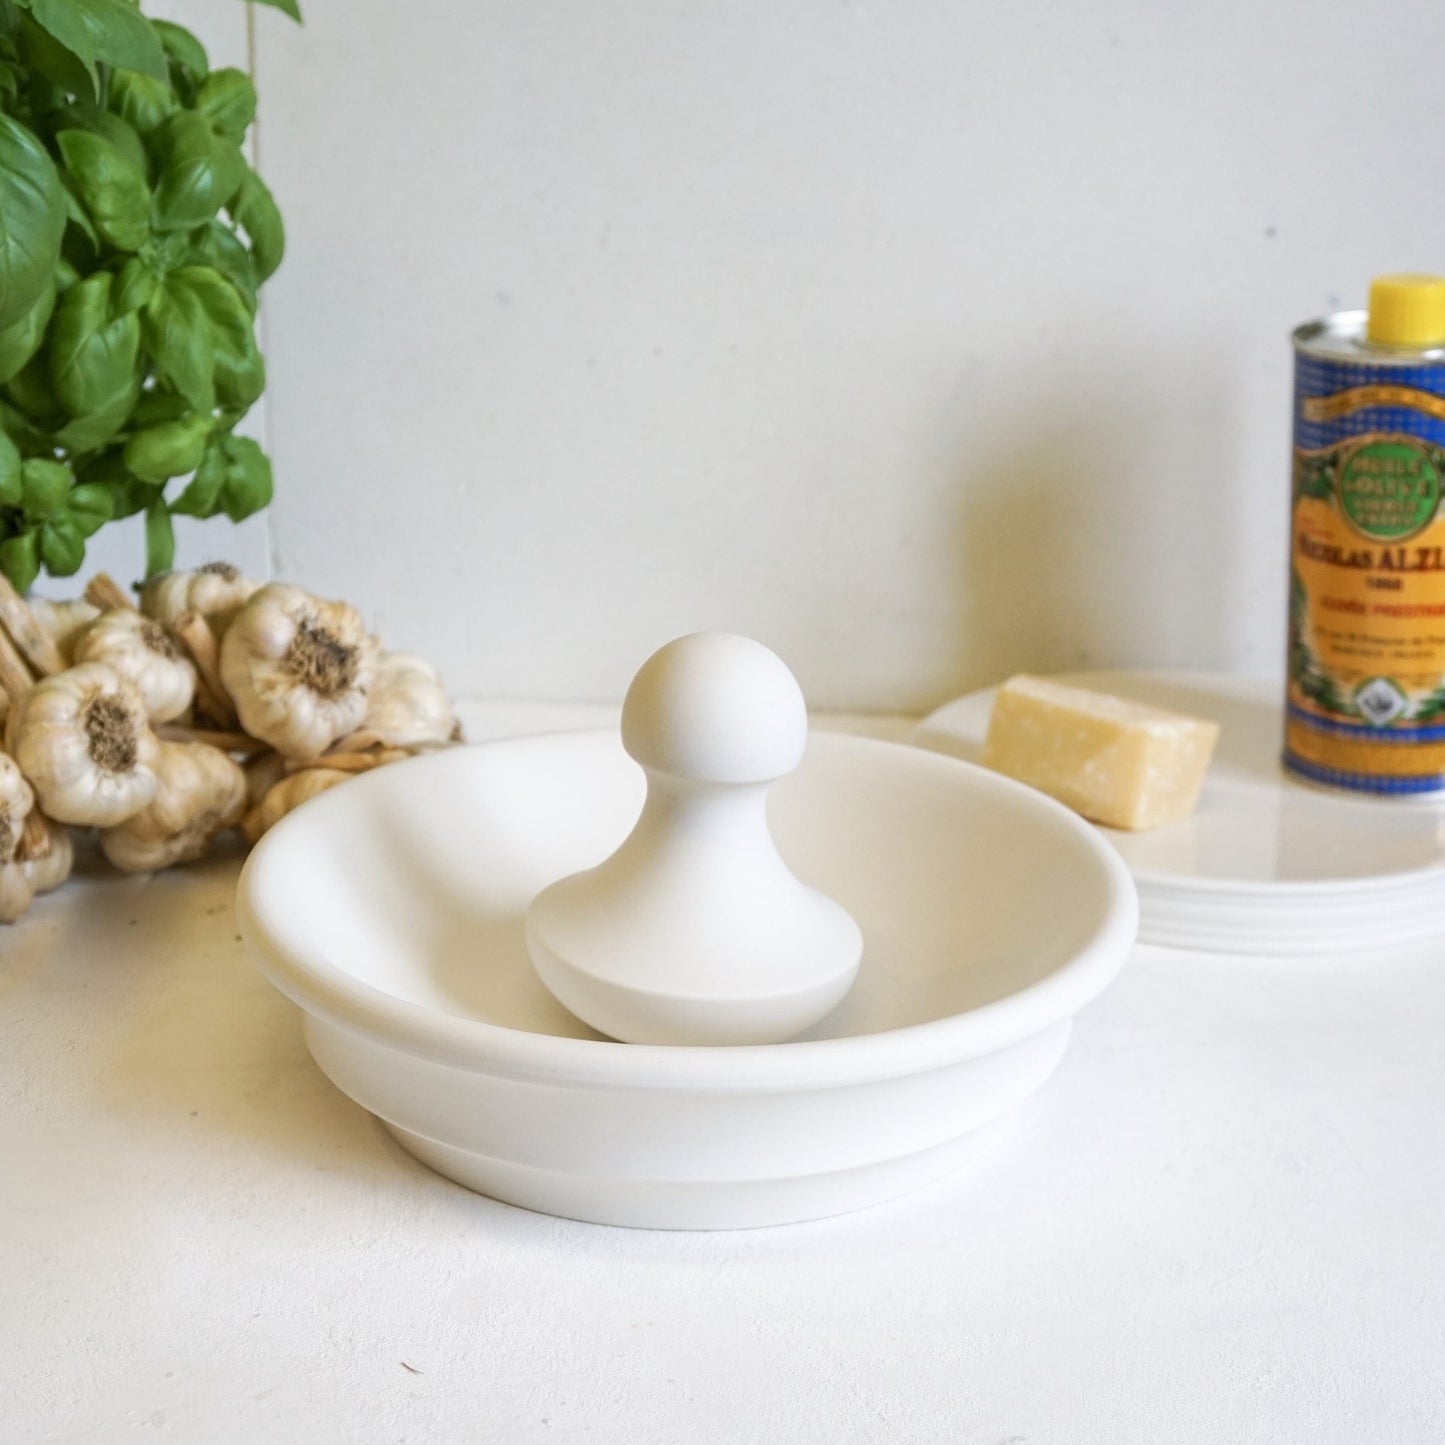 Porcelain Bowl Mortar with Ball Pestle perfect for pesto making